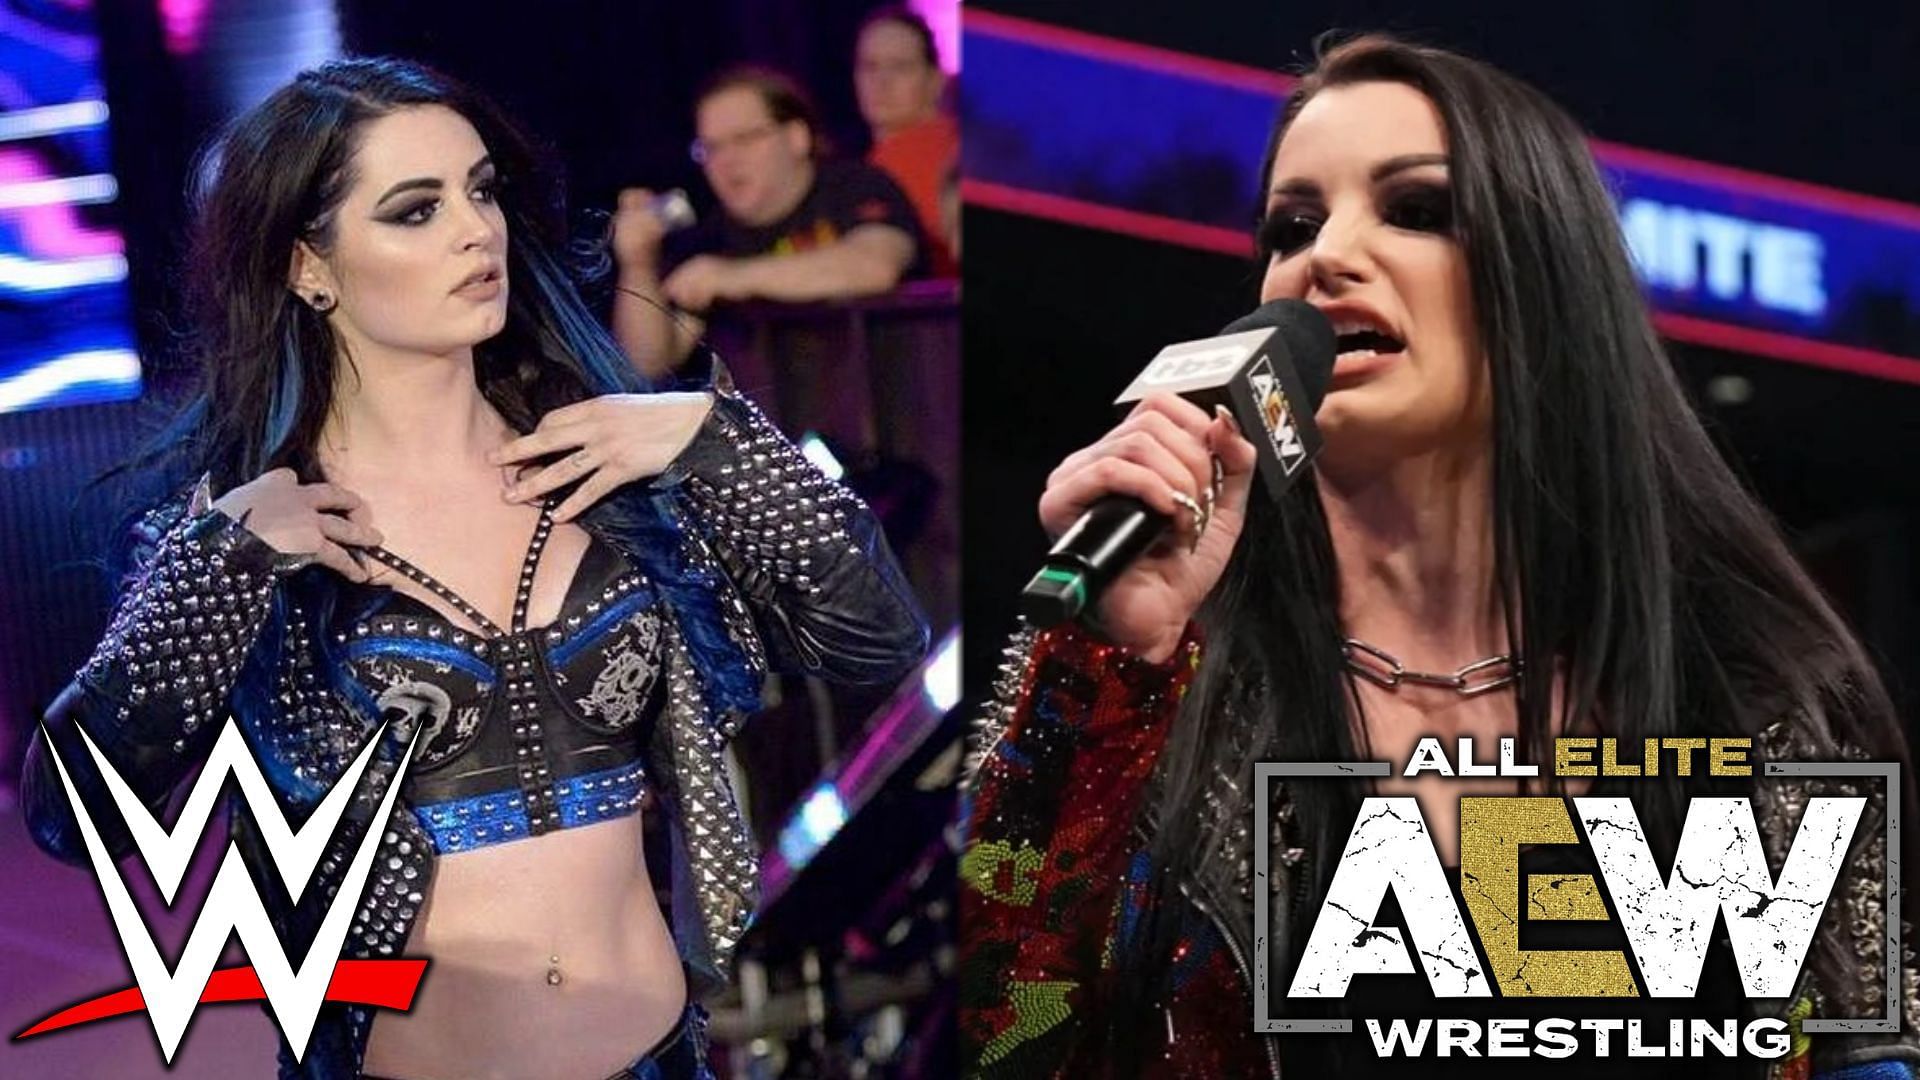 Saraya has now been signed to both WWE and AEW.